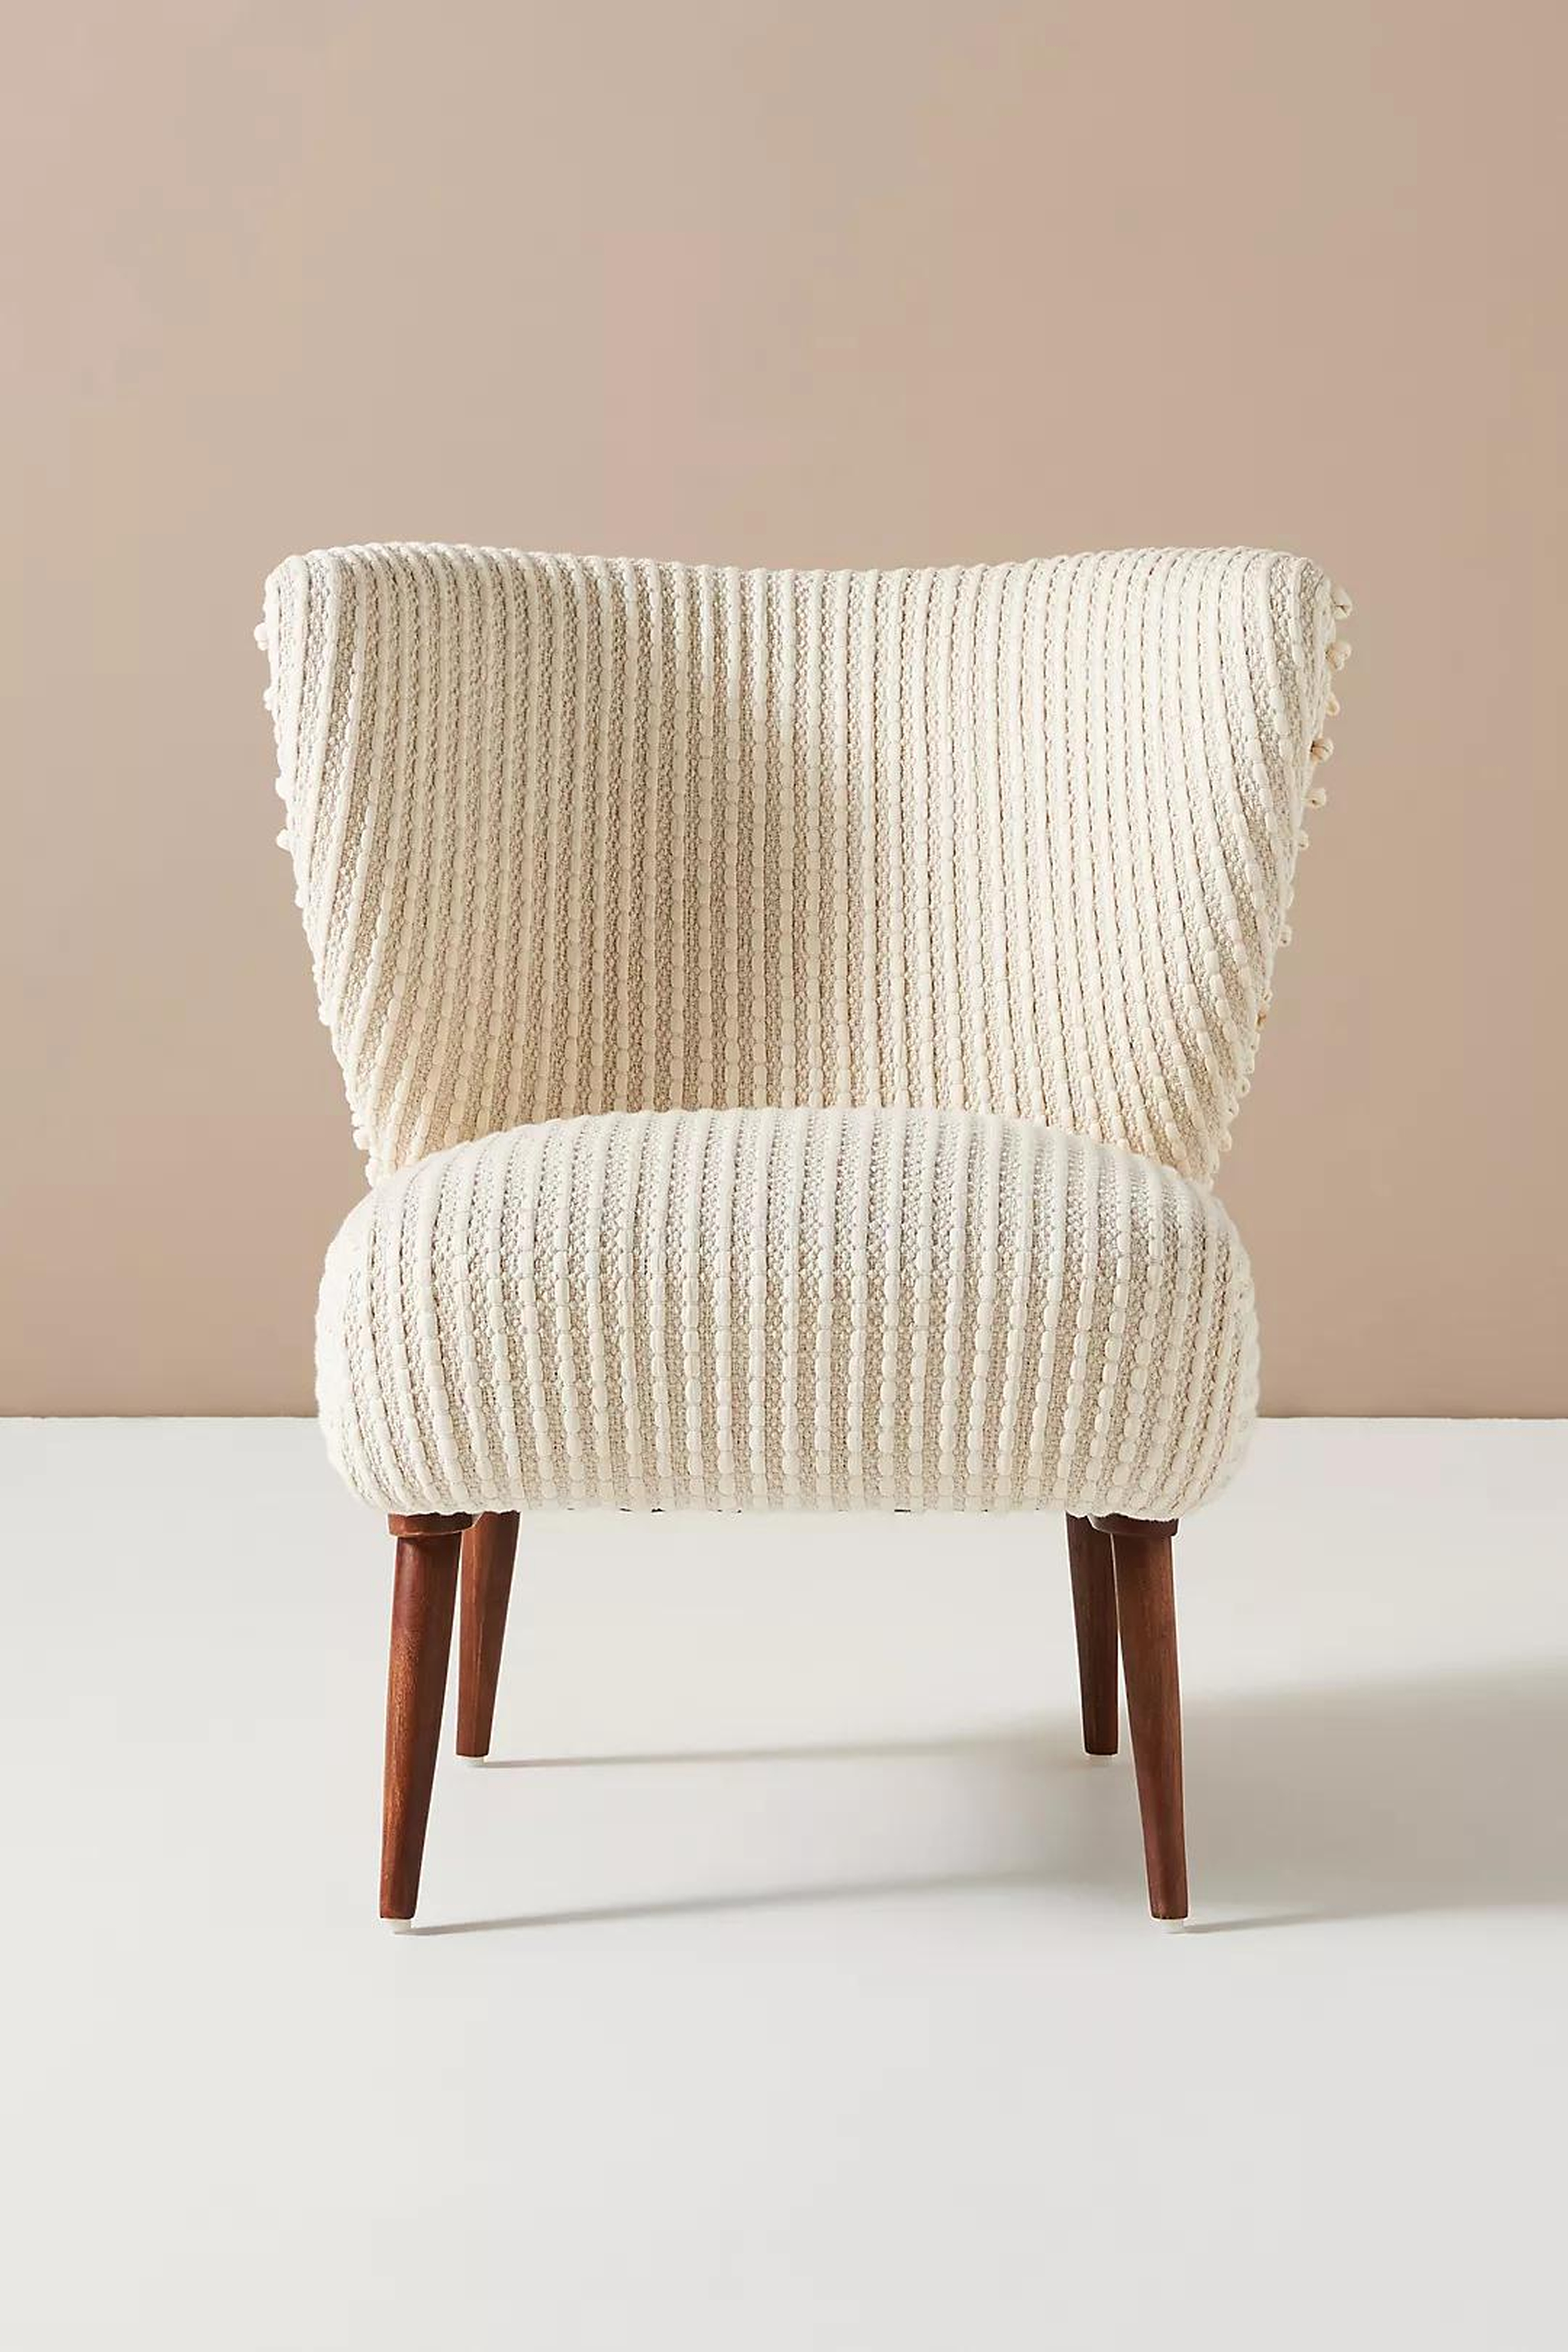 Chunky Woven Petite Accent Chair, Neutral - Anthropologie